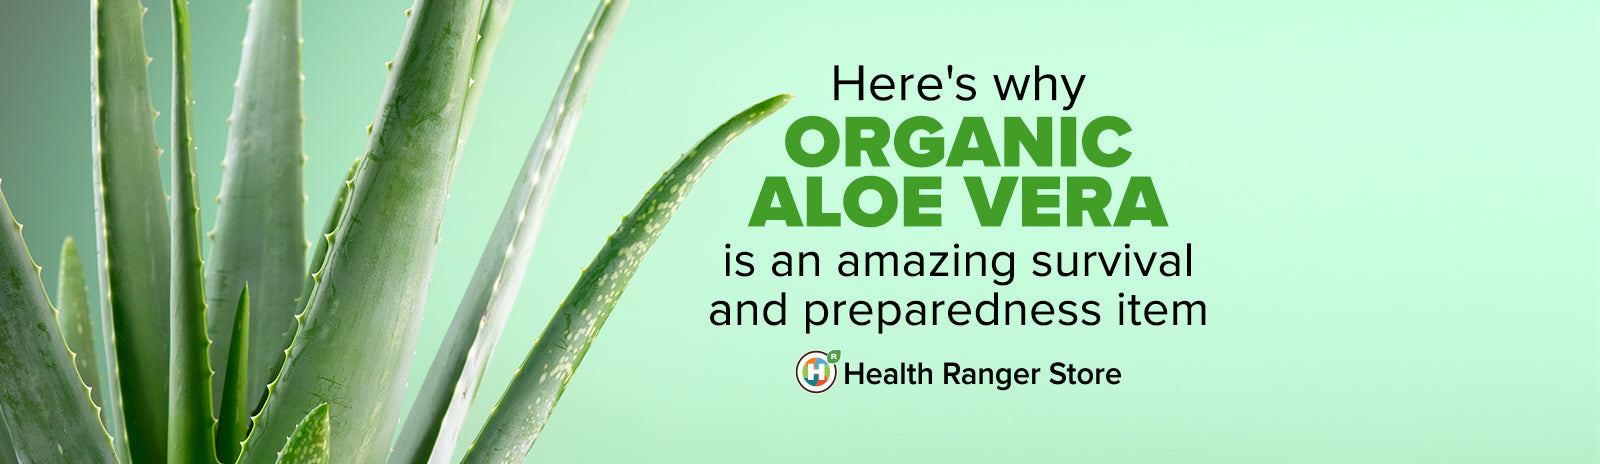 Here’s why Organic Aloe Vera is an amazing survival and preparedness item